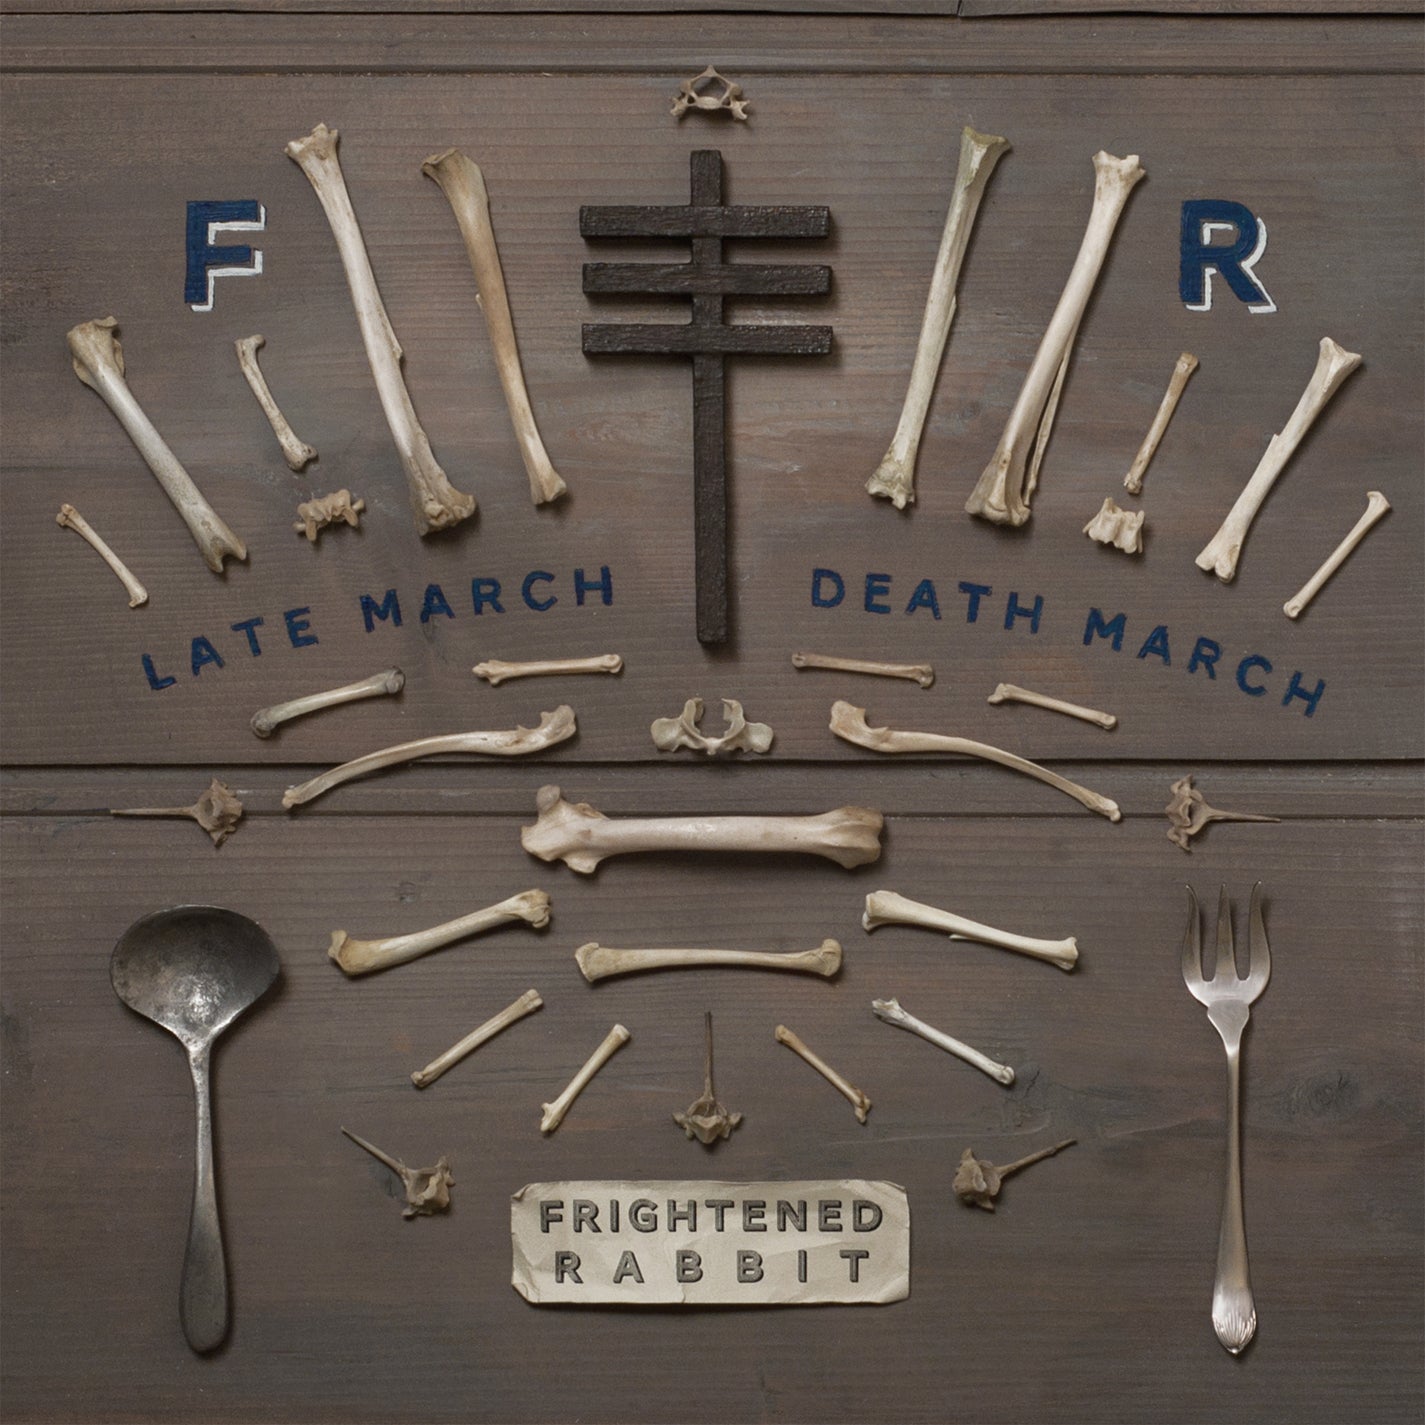 Frightened Rabbit - Late March, Death March: Etched Vinyl 7" Single